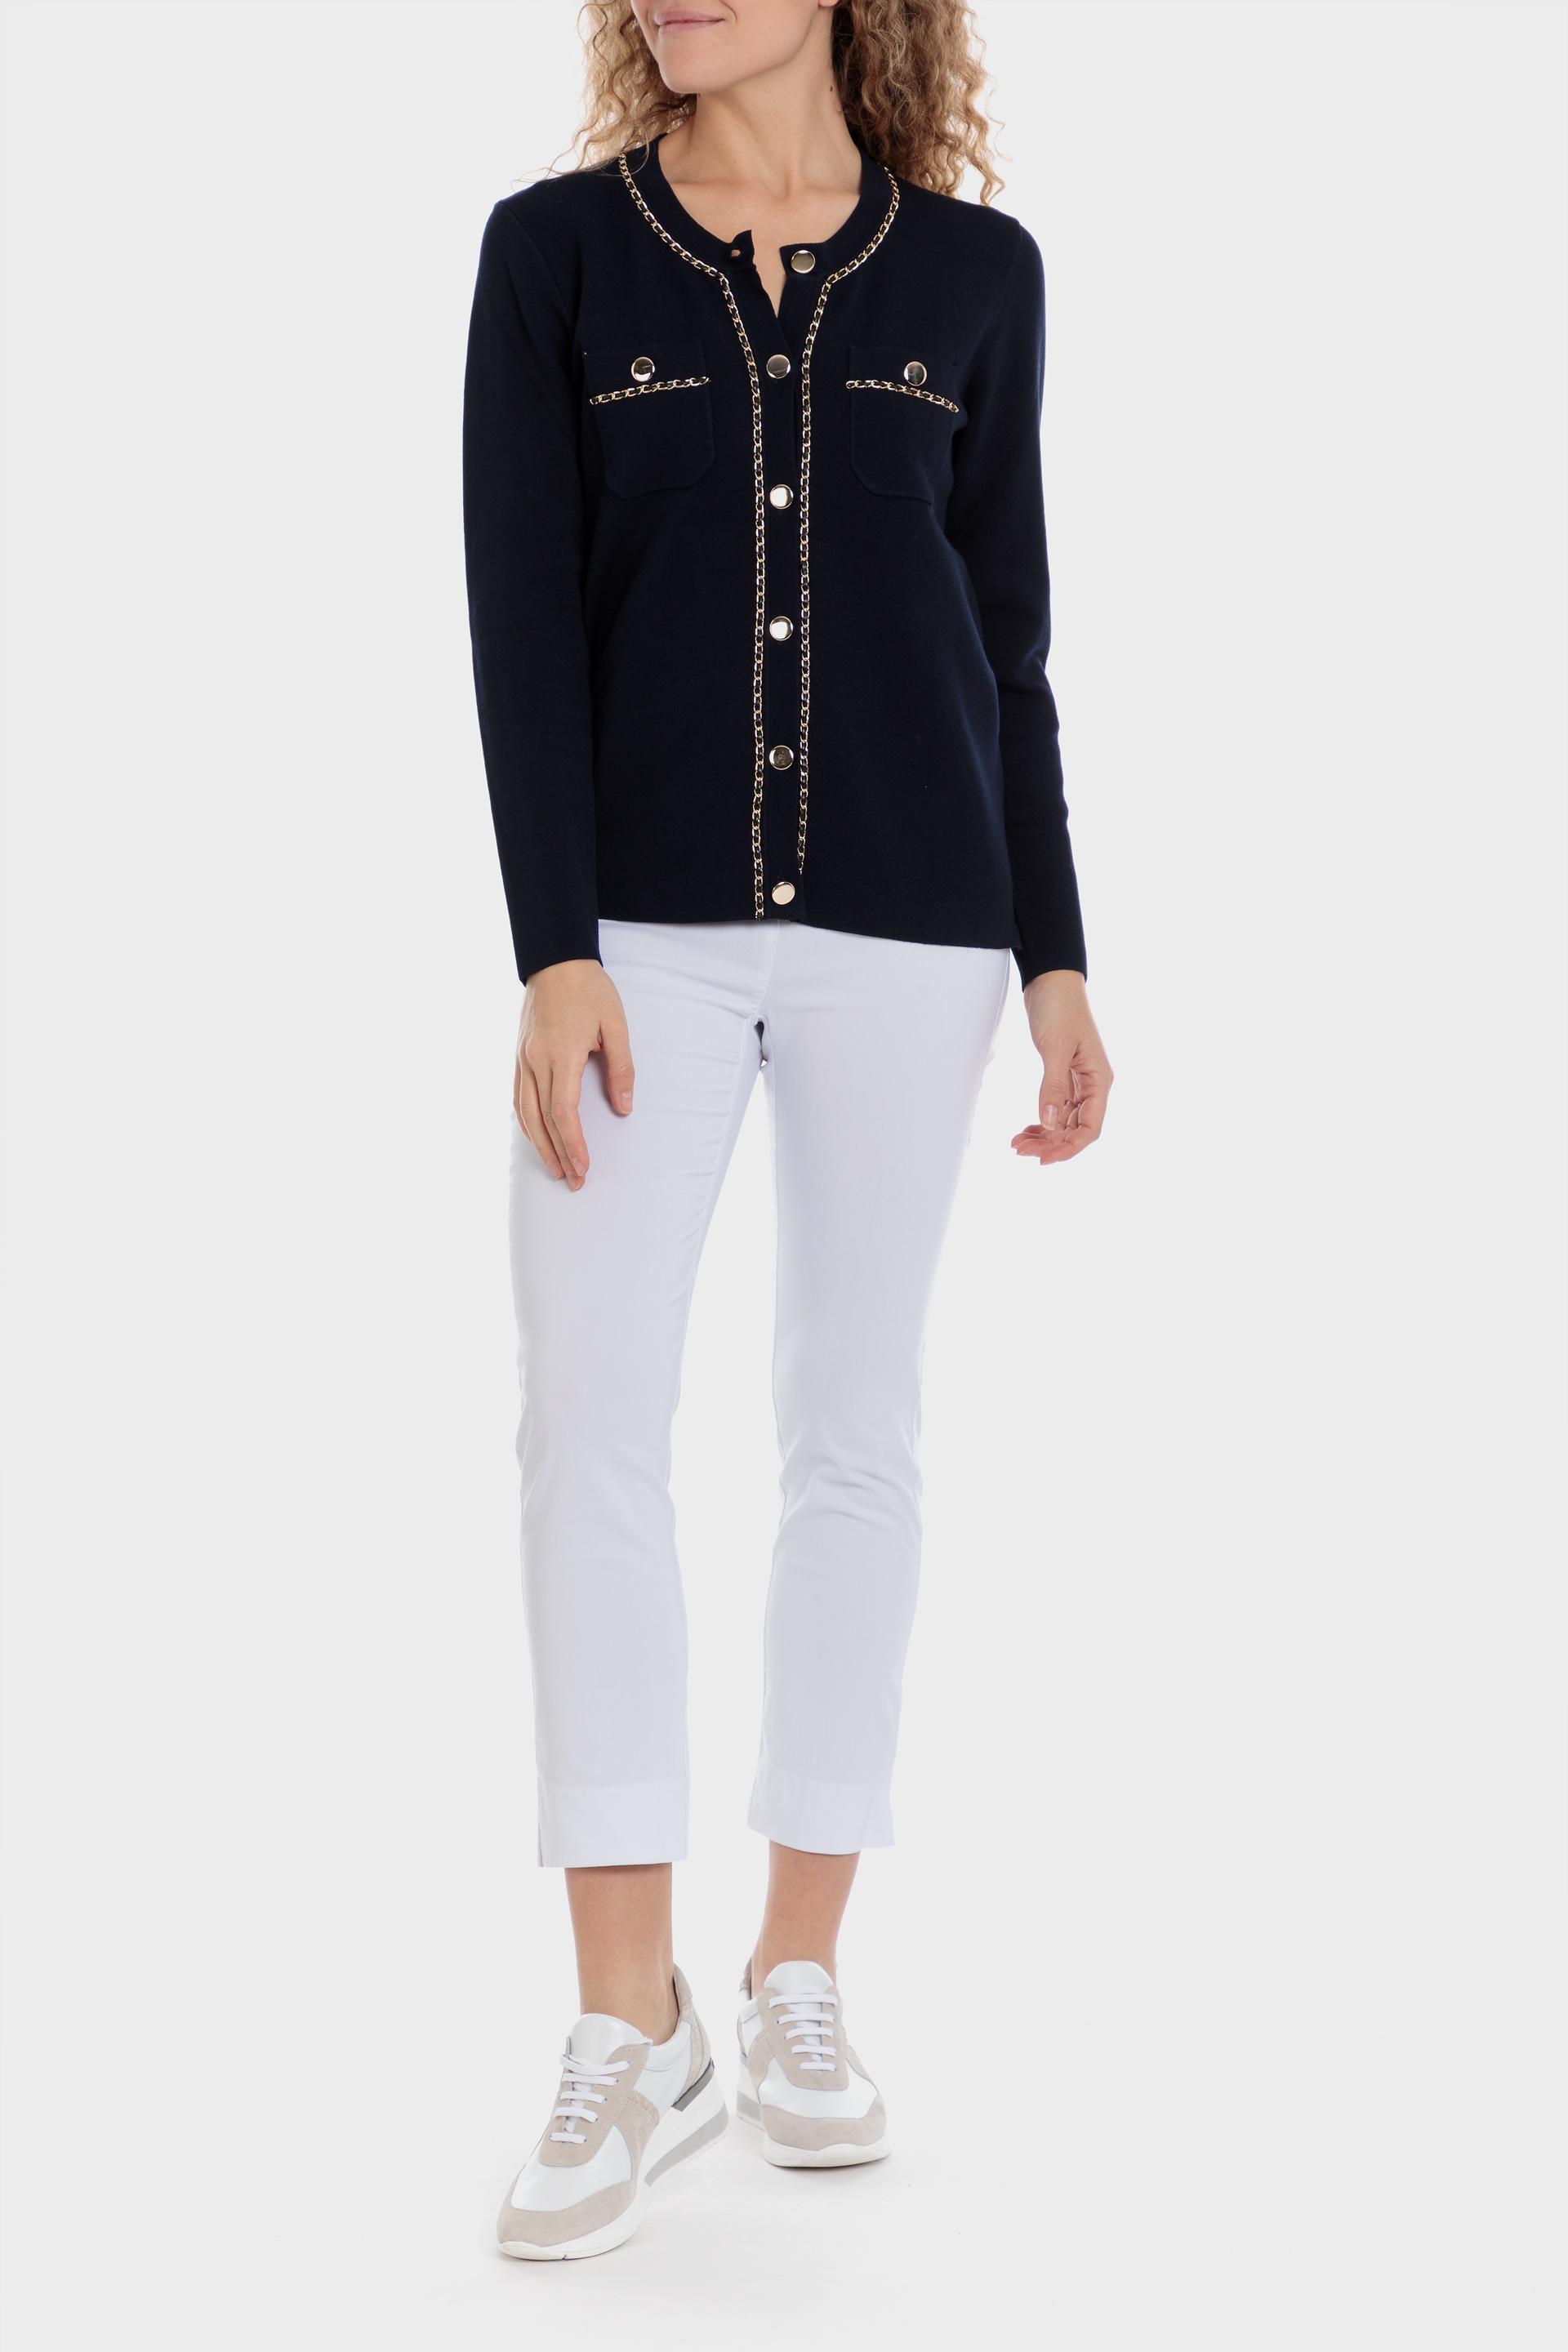 Punt Roma - Navy Knitted Jacket